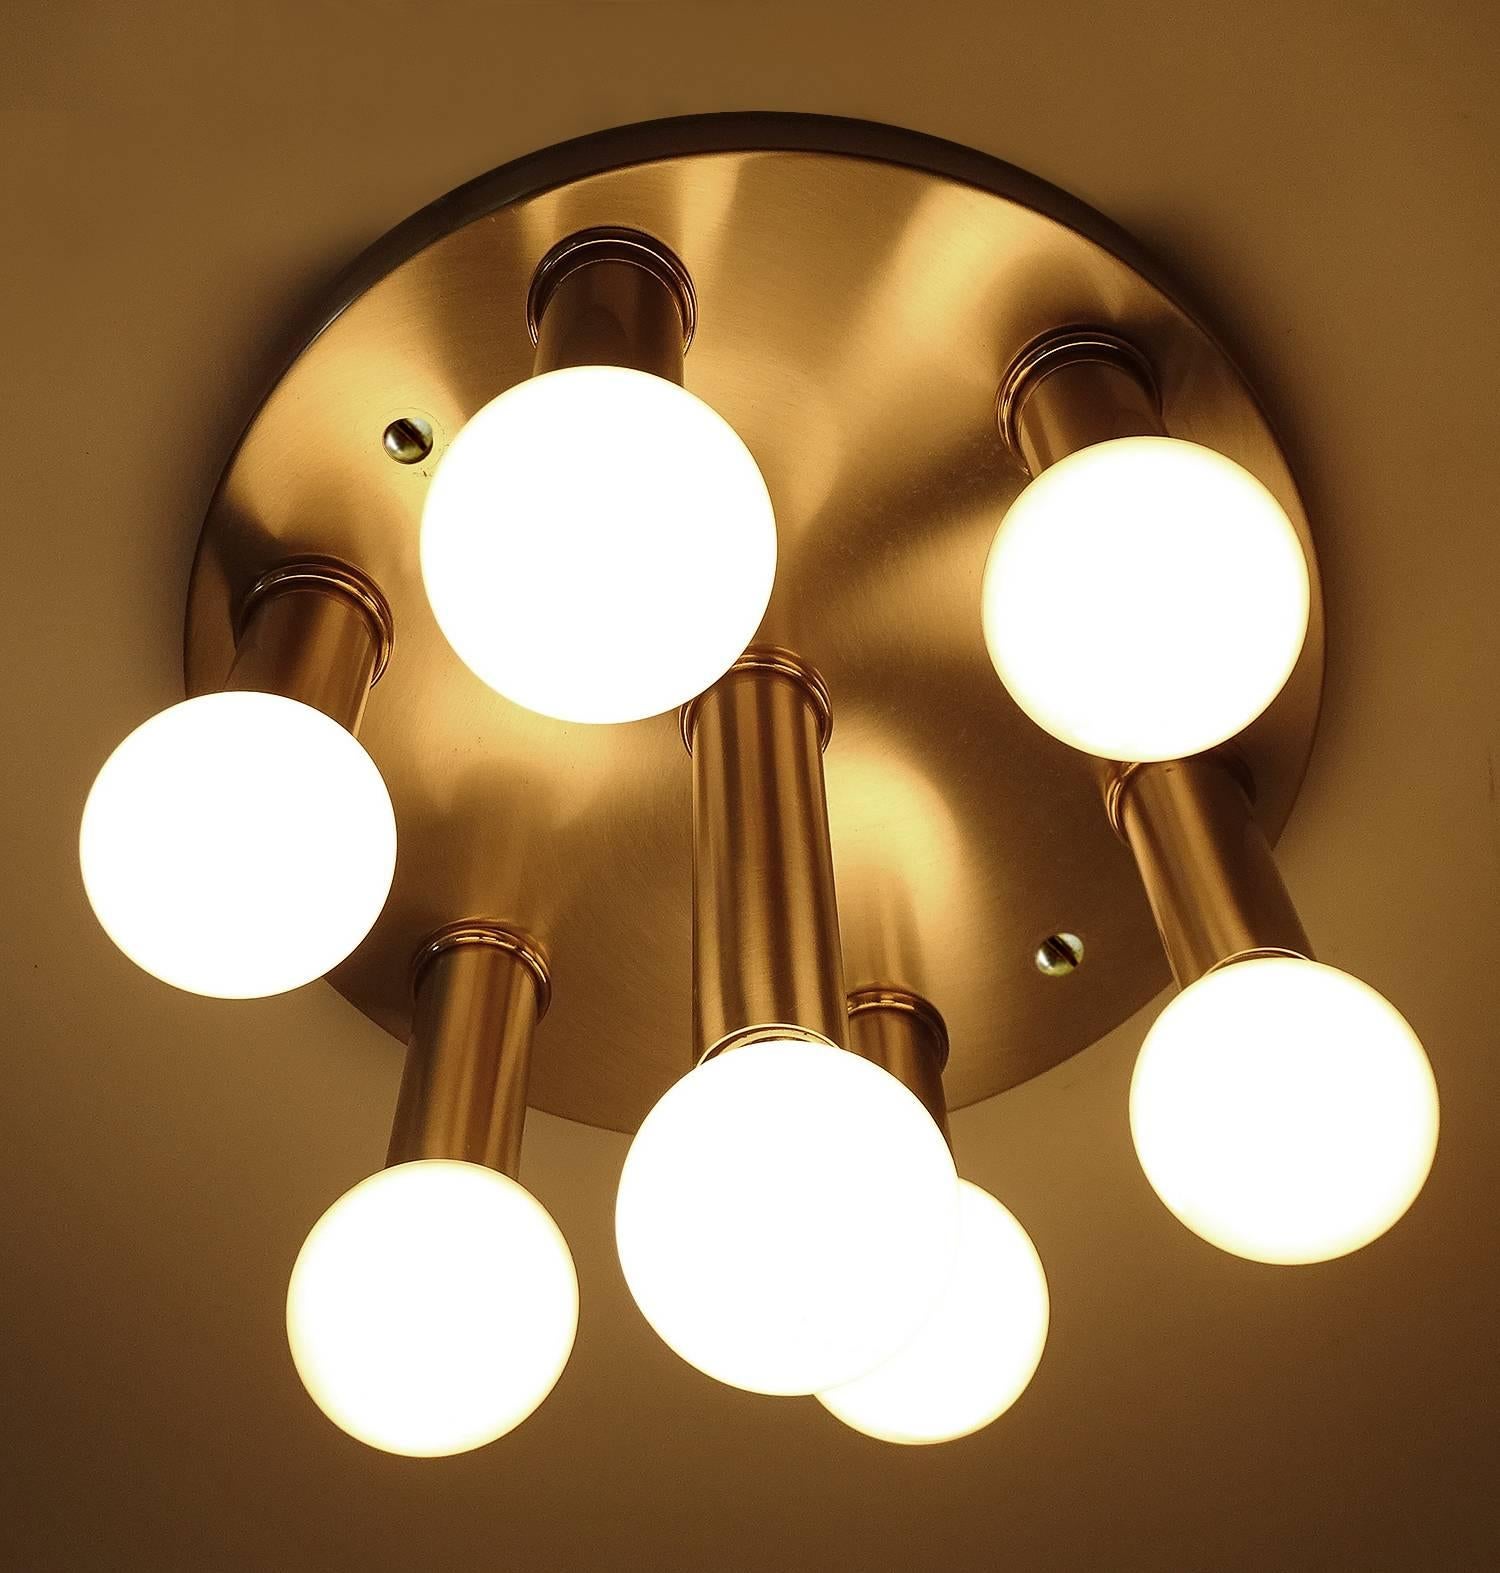 A flush mount light by Honsel, brushed stainless steel and brass trims.

Dimensions
8.66 in. / 22 cm H
Diameter
11.02 in. (28 cm)

Seven candelabra size bulbs, 40 watts each.